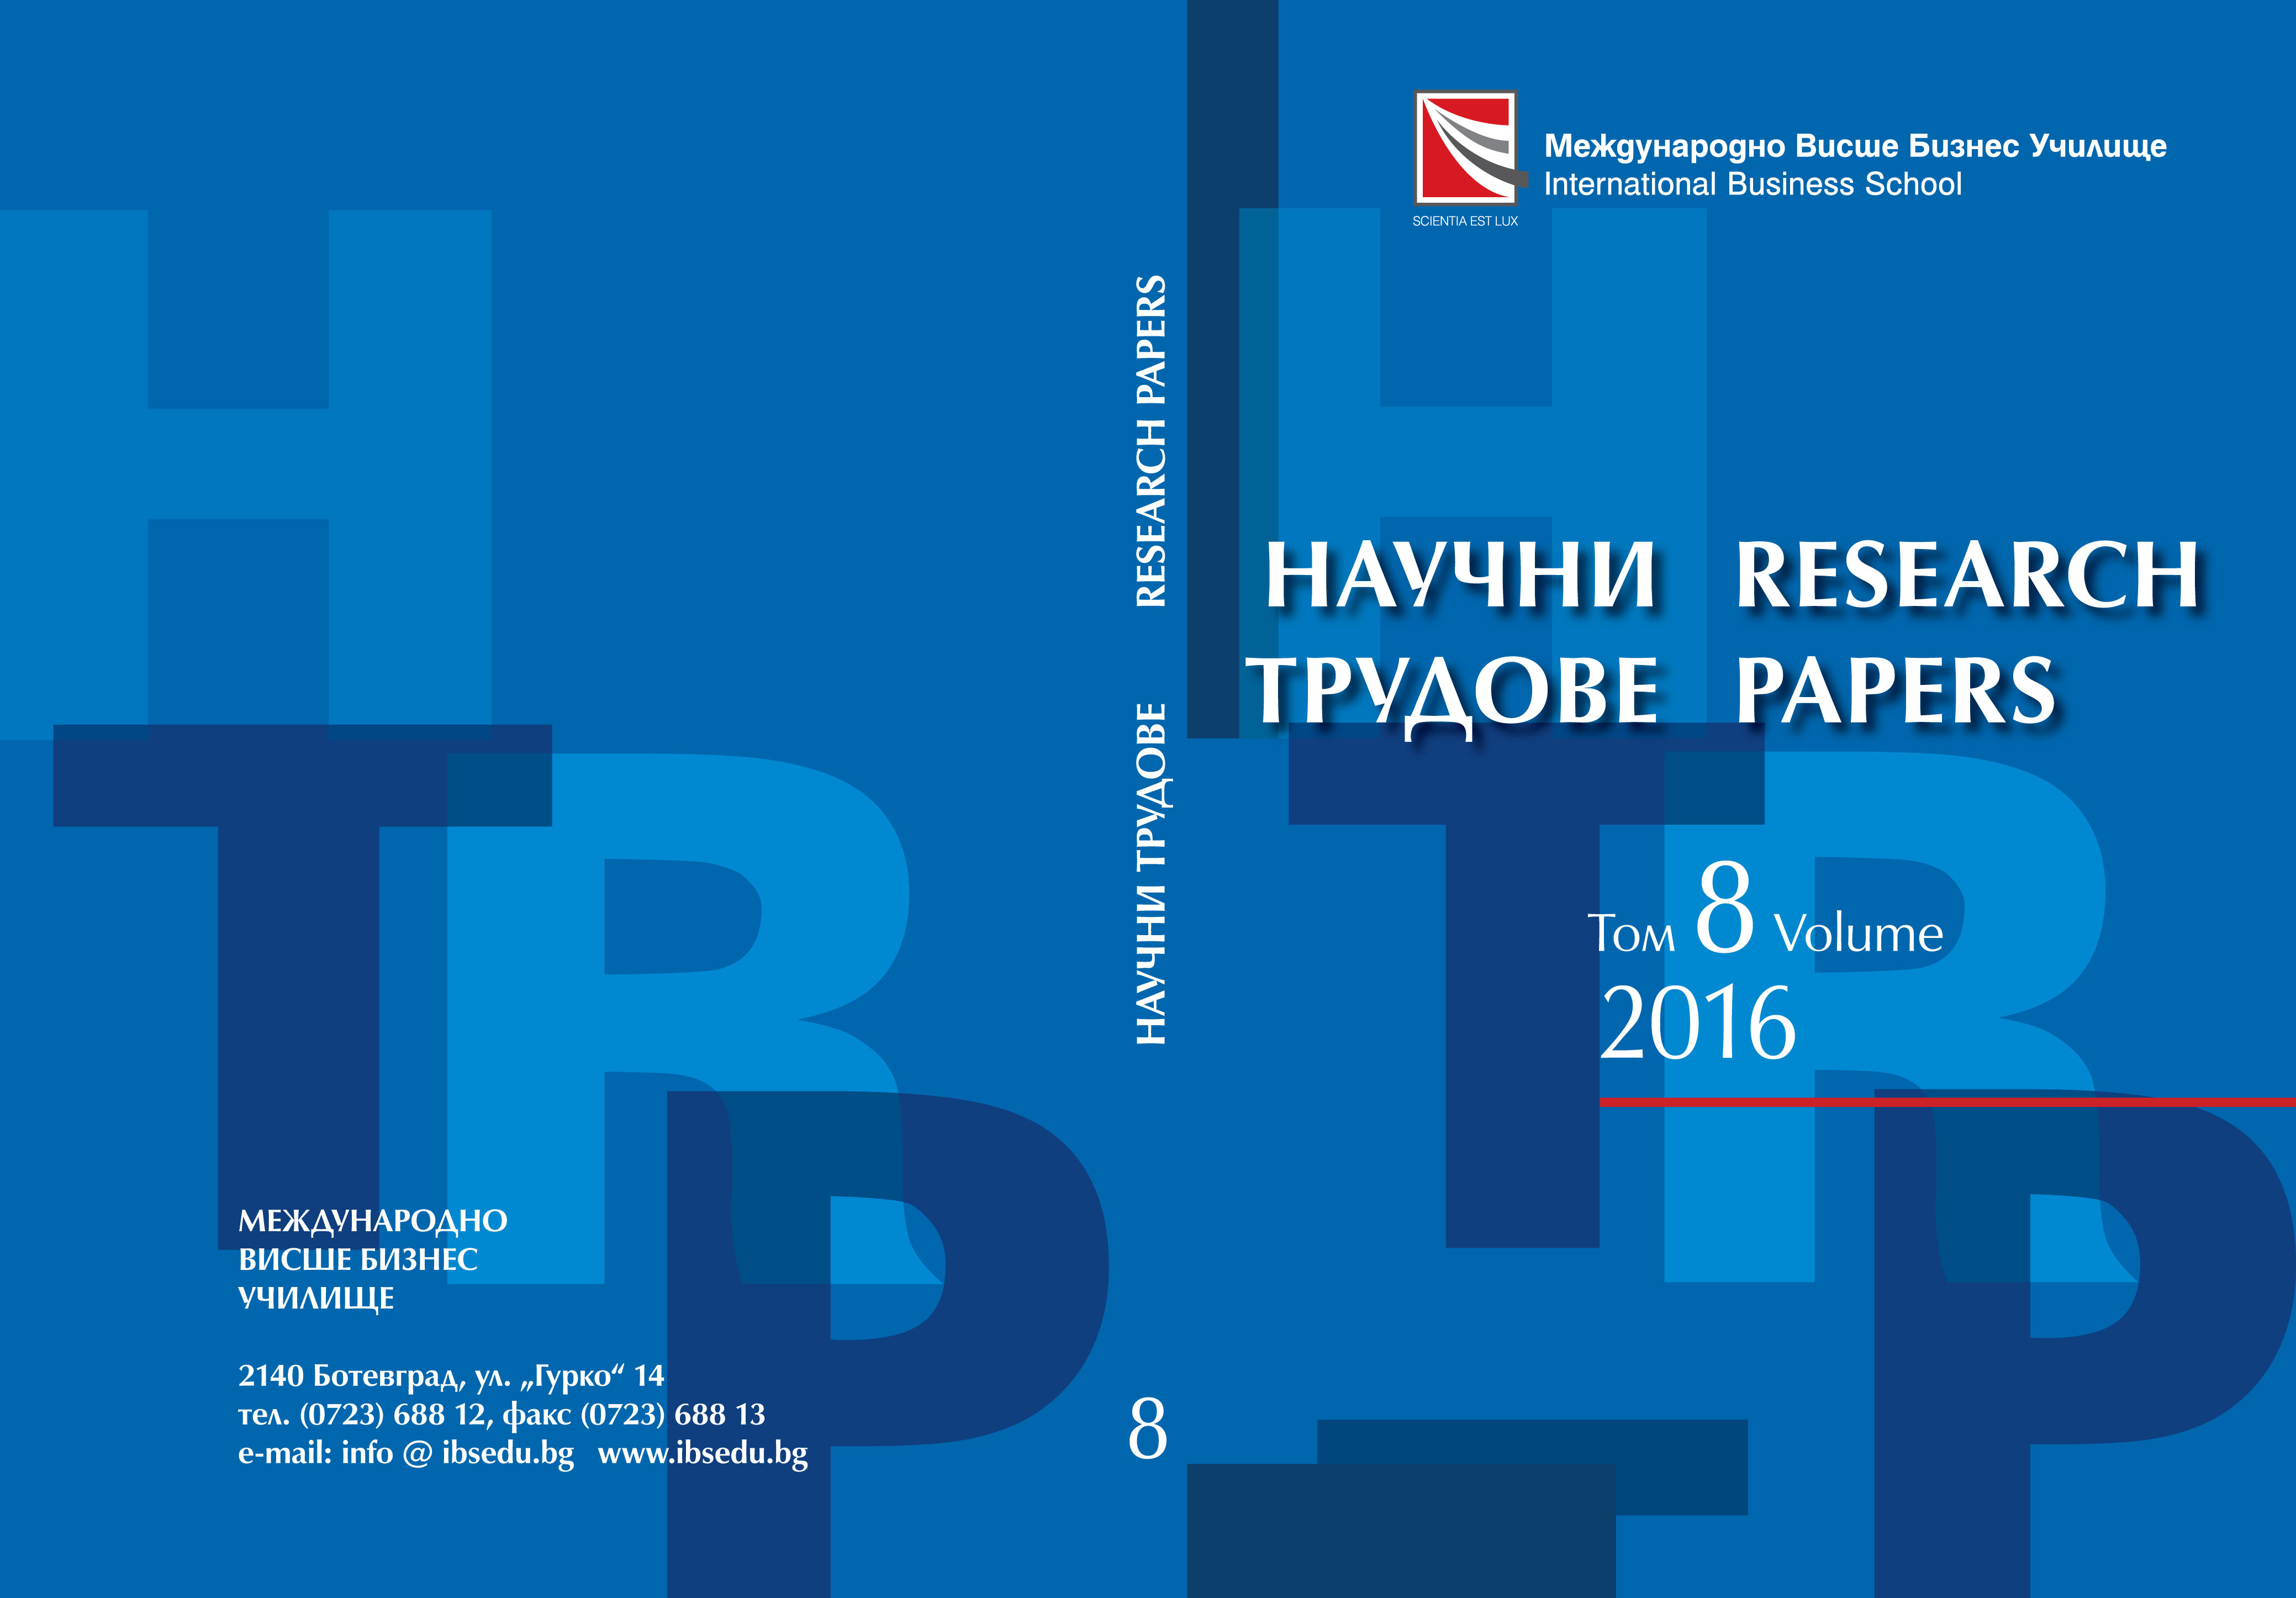 Research Papers. International Business School - Botevgrad